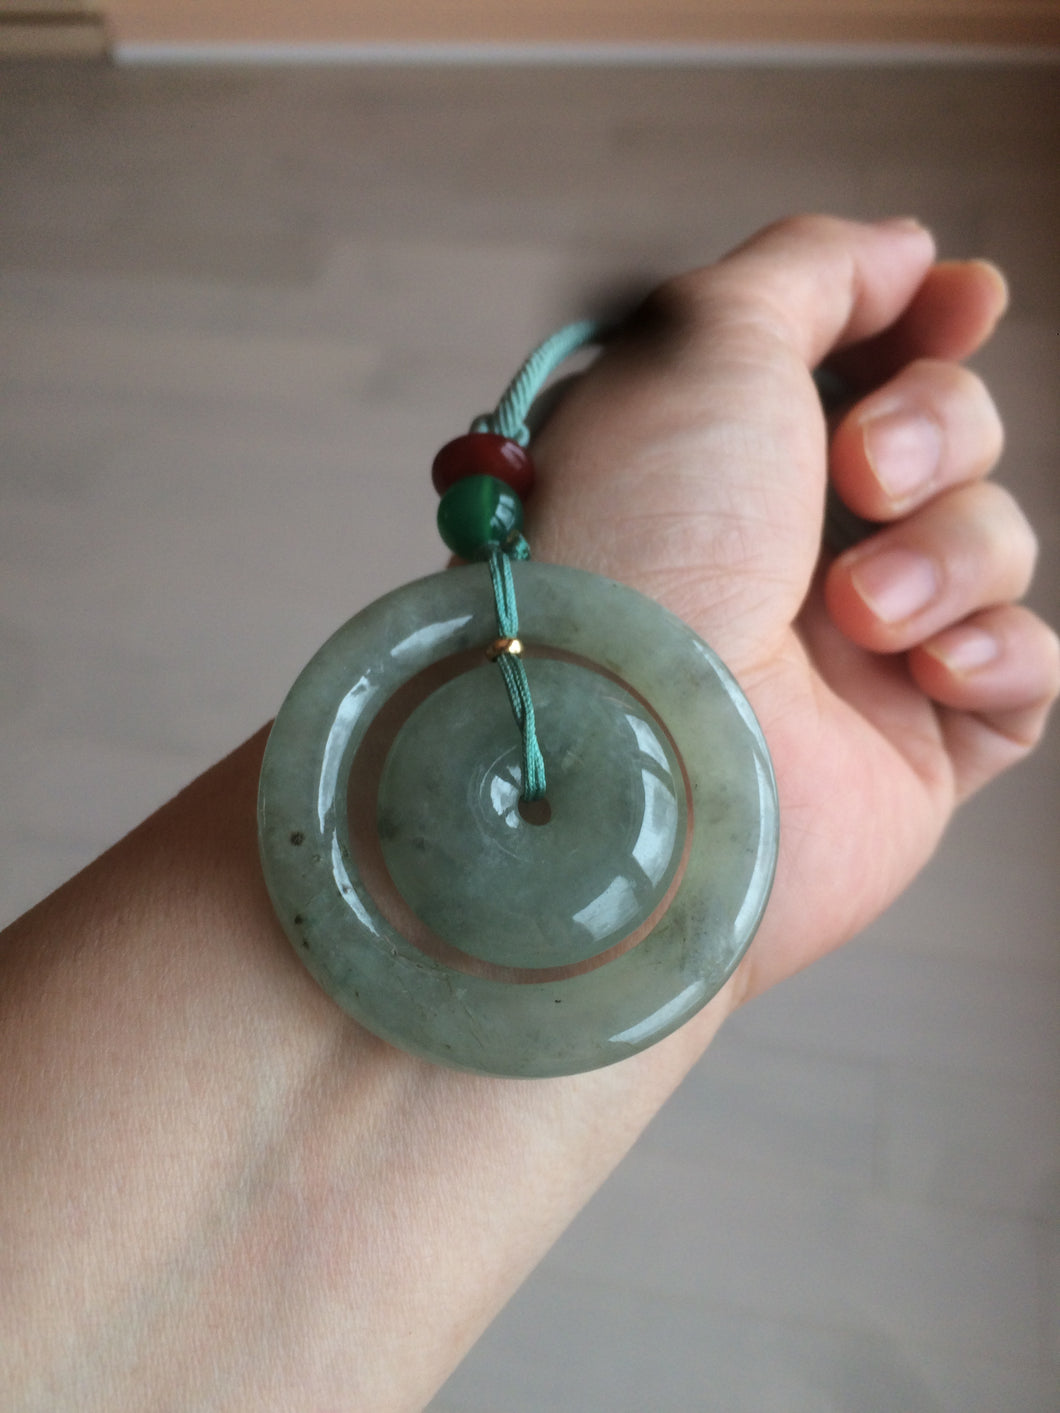 44mm Type A 100% Natural icy watery light green/gray Jadeite Jade concentric circle safety Guardian ring Pendant (子母扣,同心环) AT76